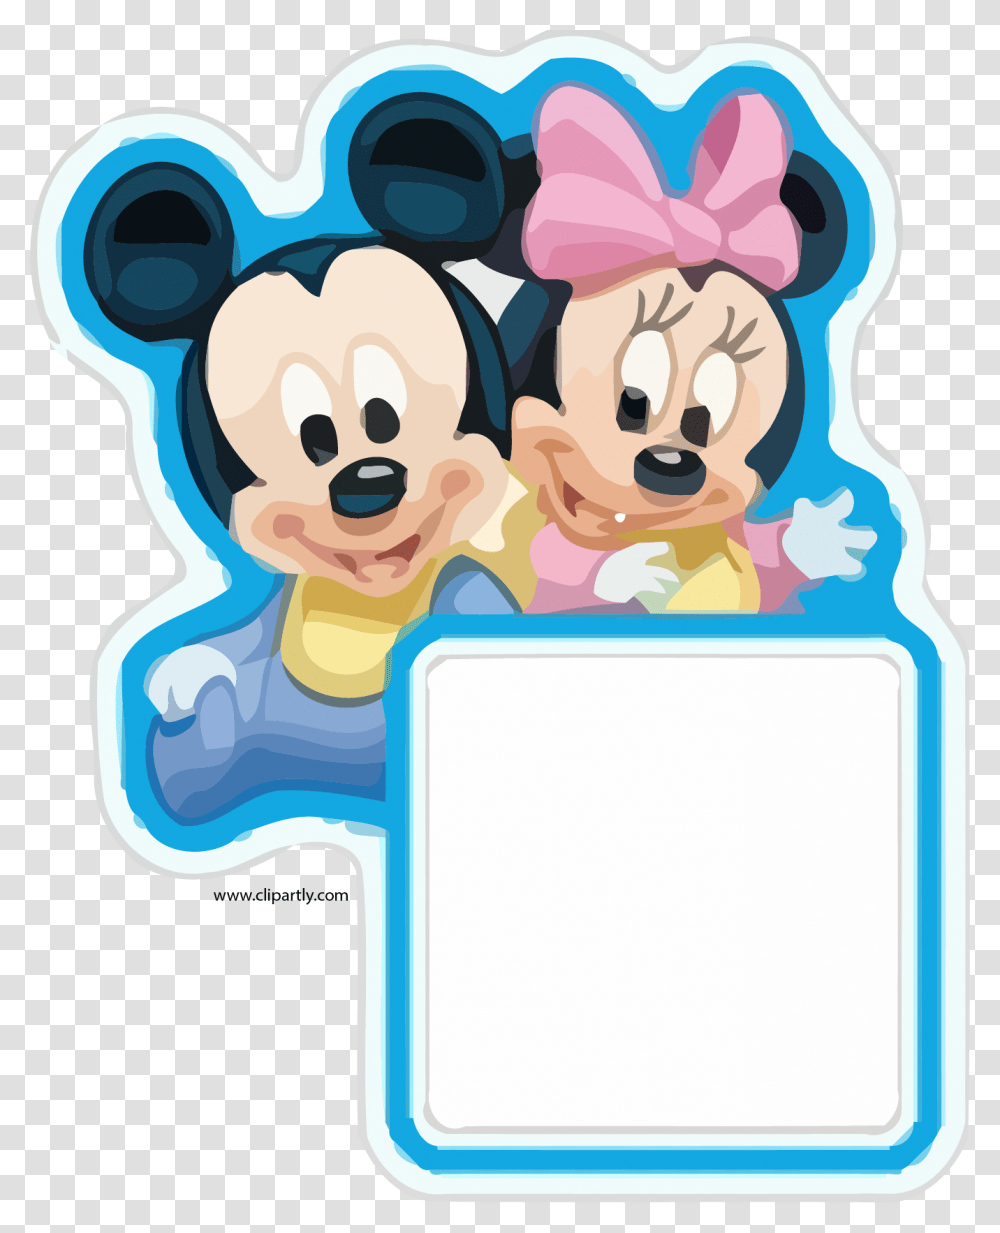 Mickey Minnie Picture Imagenes De Minnie Mouse Y Mickey Bebes, Computer, Electronics Transparent Png